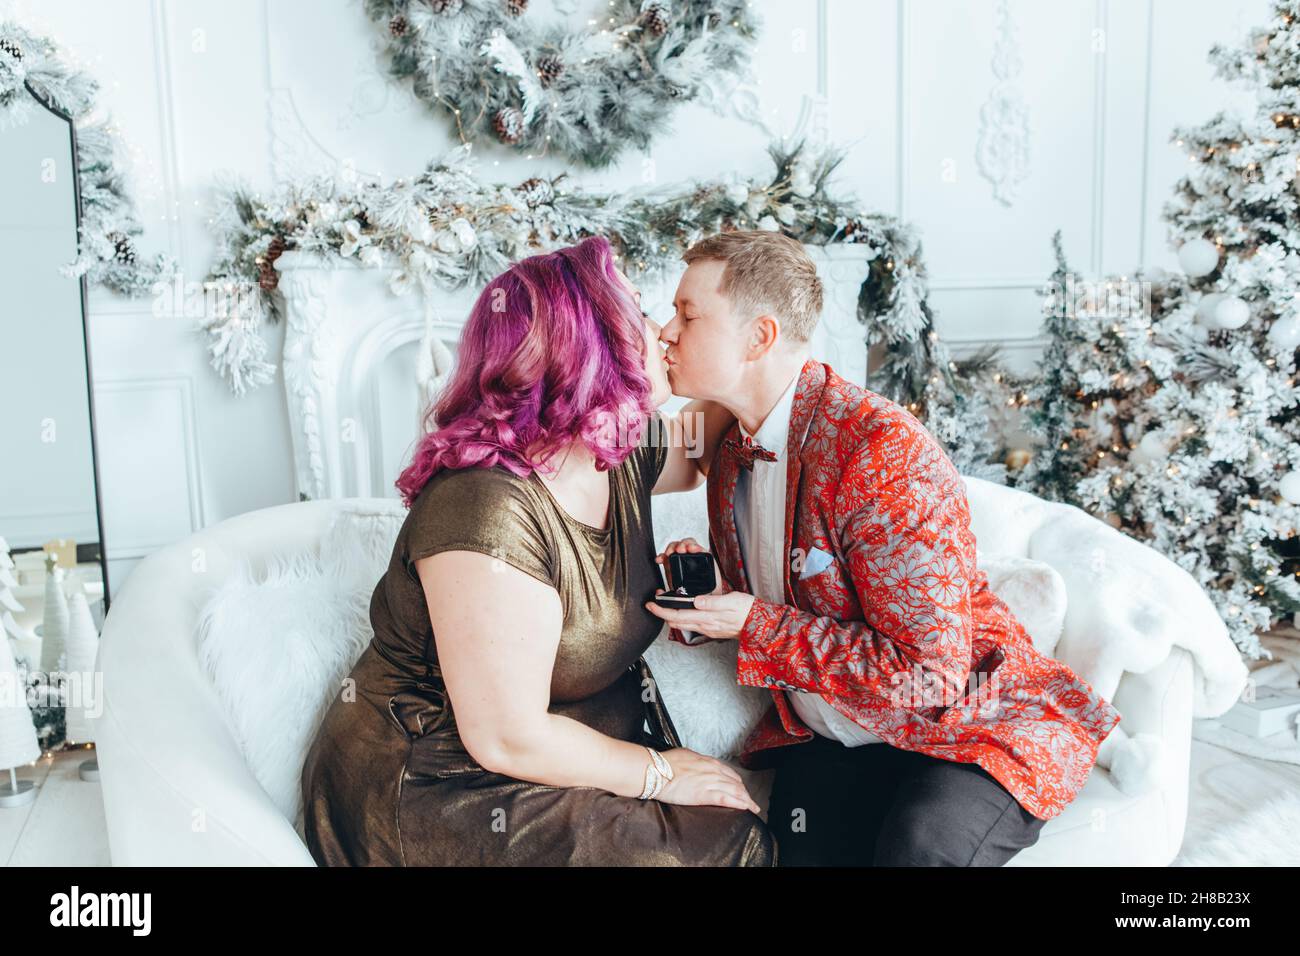 Homosexual gay butch woman proposing her girlfriend to marry her and giving her box with ring. LGBTQ lesbian couple celebrating Christmas or New Year Stock Photo